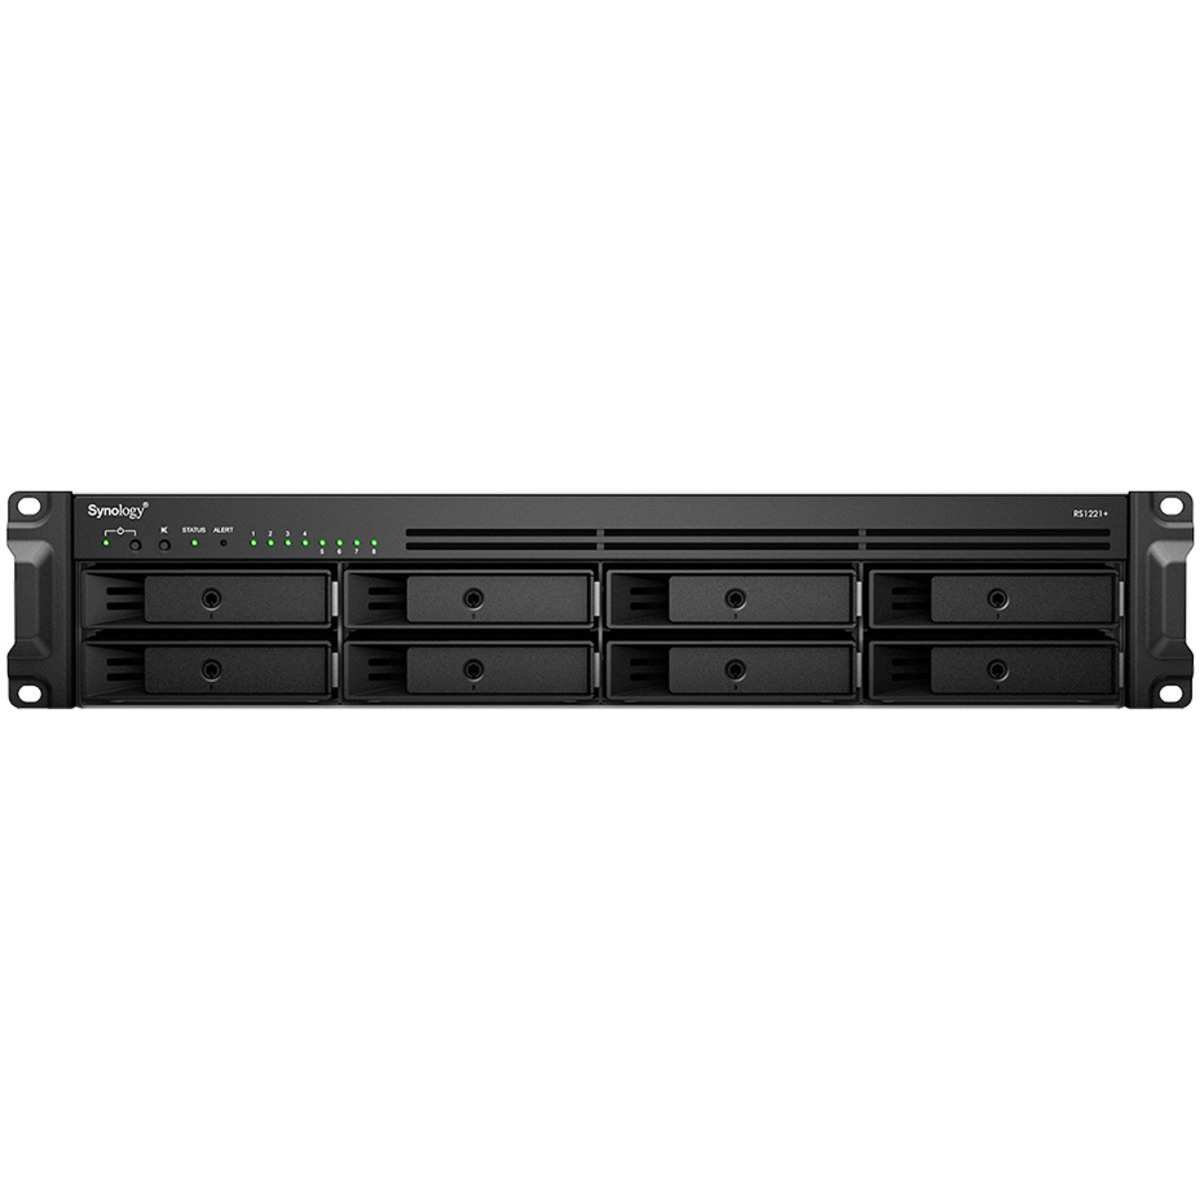 buy $5646 Synology RackStation RS1221RP+ 144tb RackMount NAS - Network Attached Storage Device 8x18000gb Toshiba Enterprise Capacity MG09ACA18TE 3.5 7200rpm SATA 6Gb/s HDD ENTERPRISE Class Drives Installed - Burn-In Tested - nas headquarters buy network attached storage server device das new raid-5 free shipping usa christmas new year holiday sale RackStation RS1221RP+